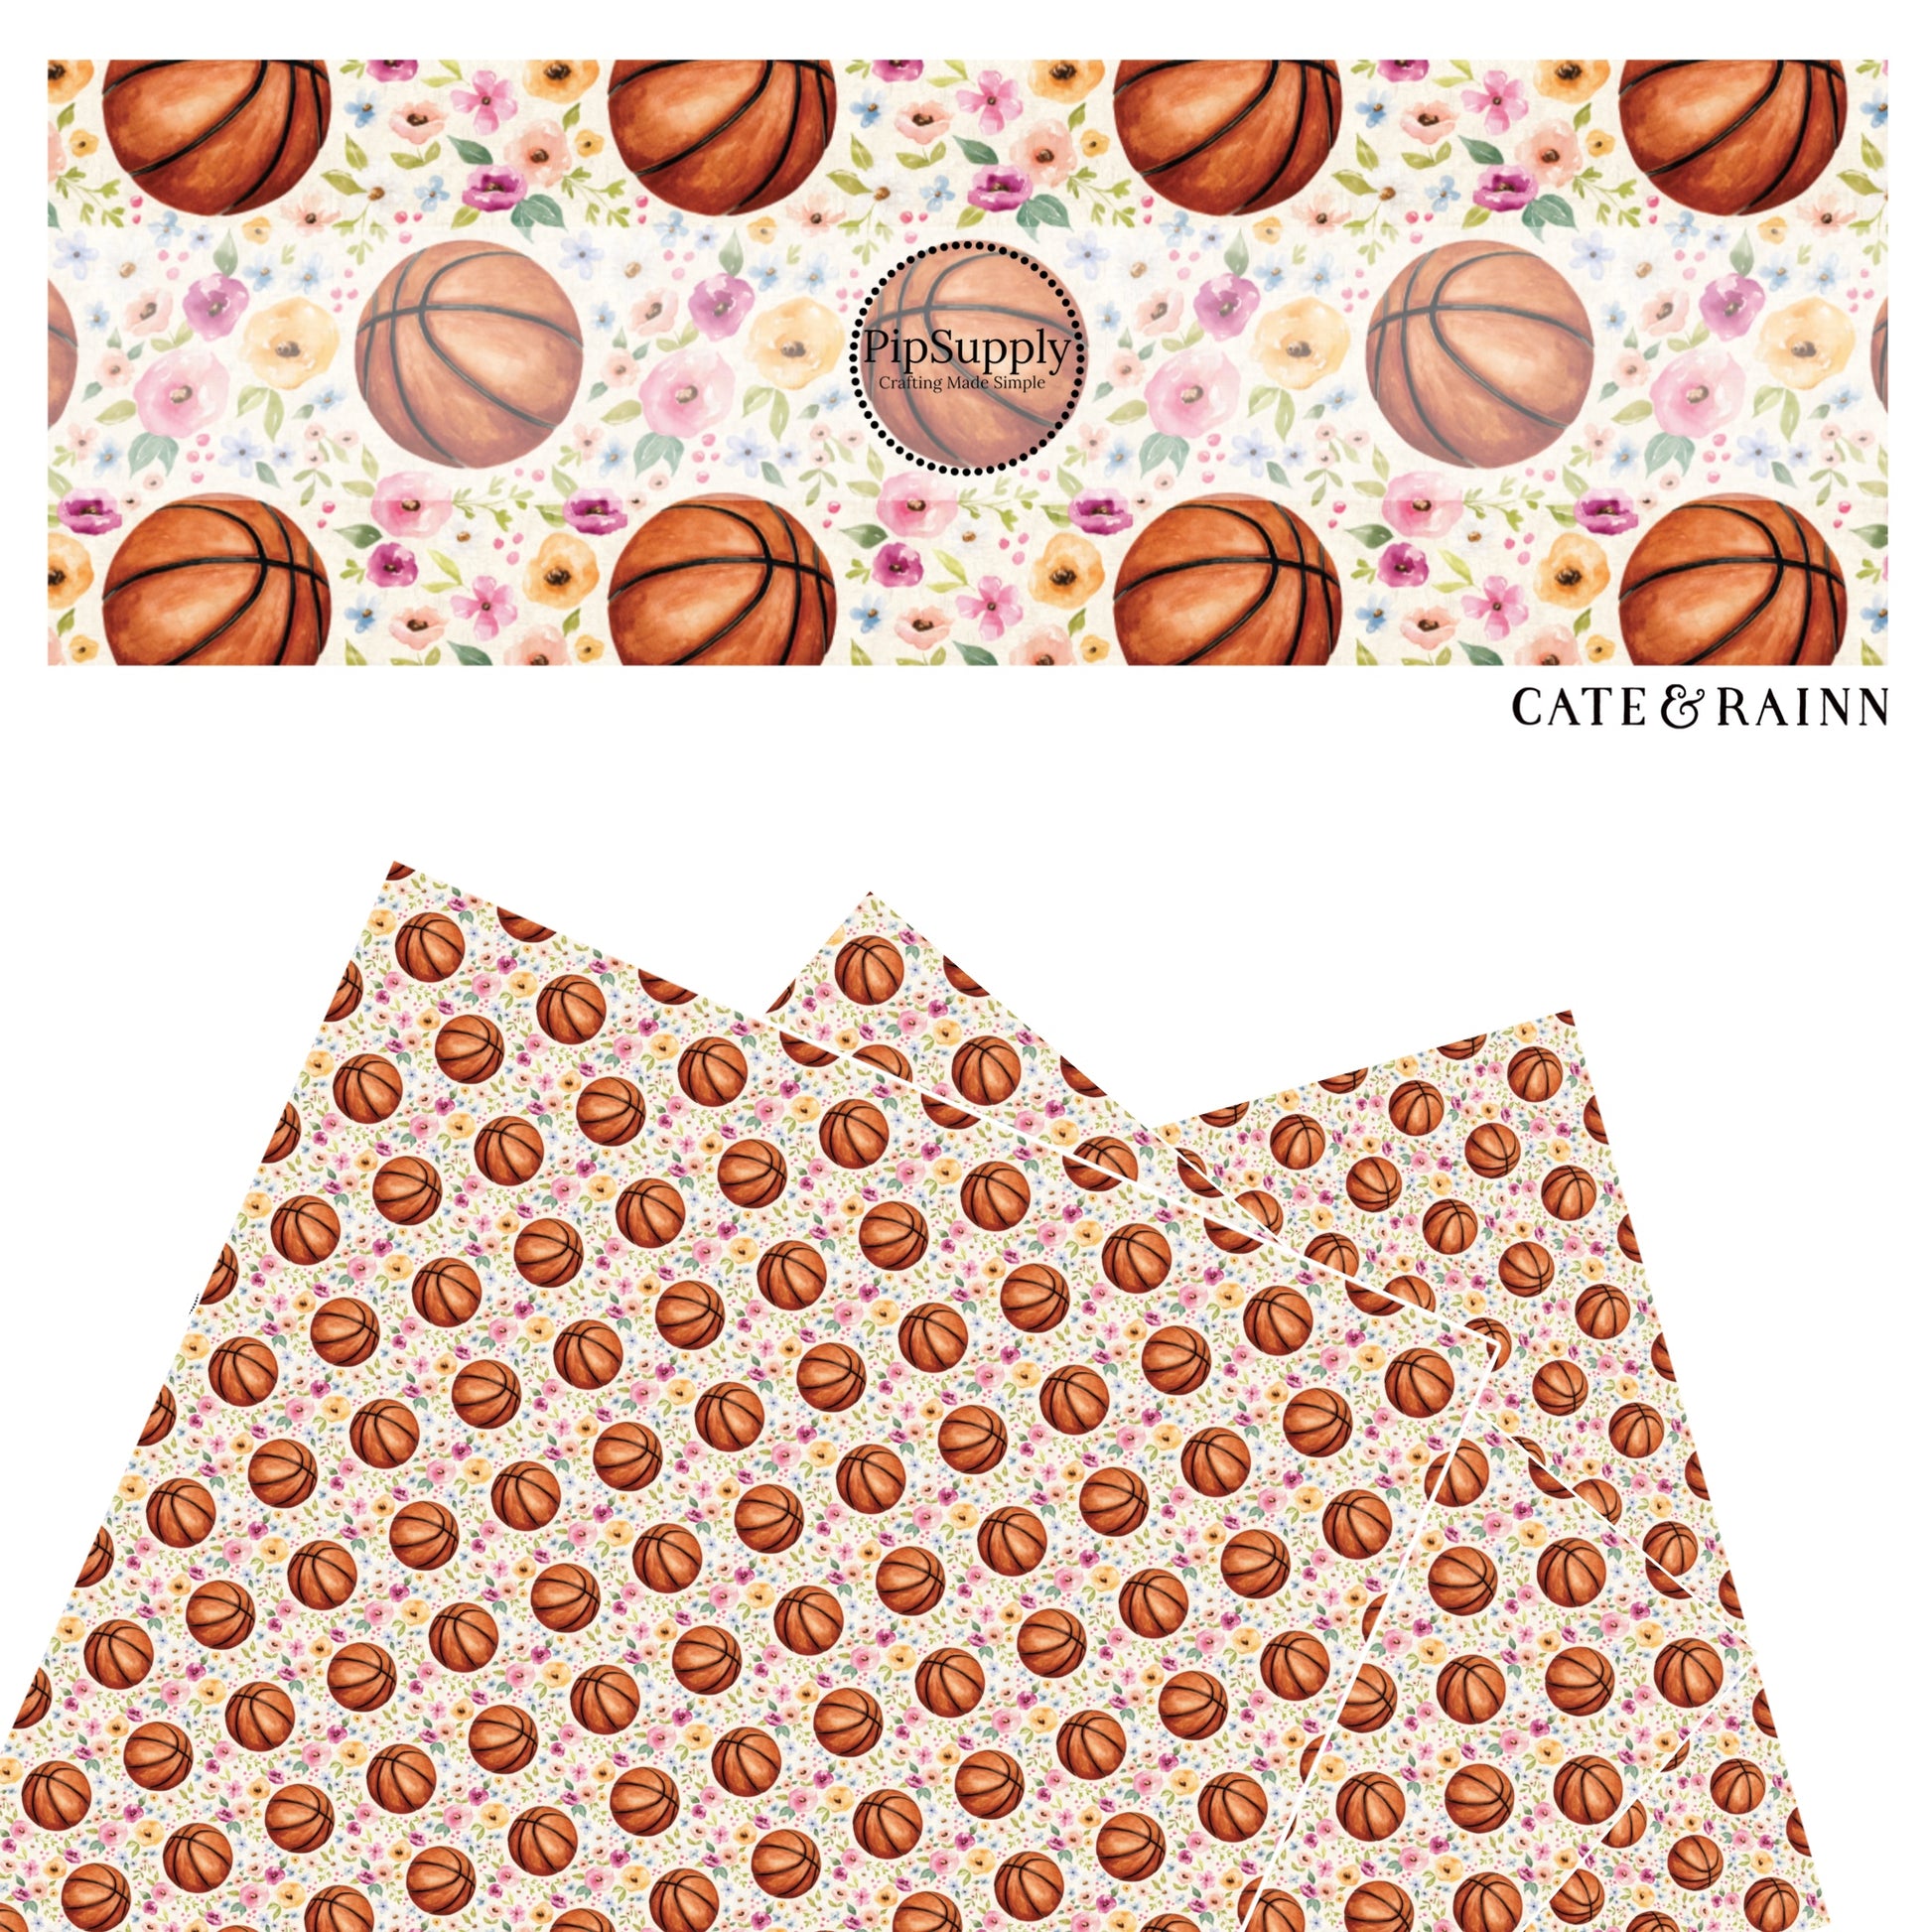 These spring floral sport pattern themed faux leather sheets contain the following design elements: basketballs surrounded by flowers on cream. Our CPSIA compliant faux leather sheets or rolls can be used for all types of crafting projects.